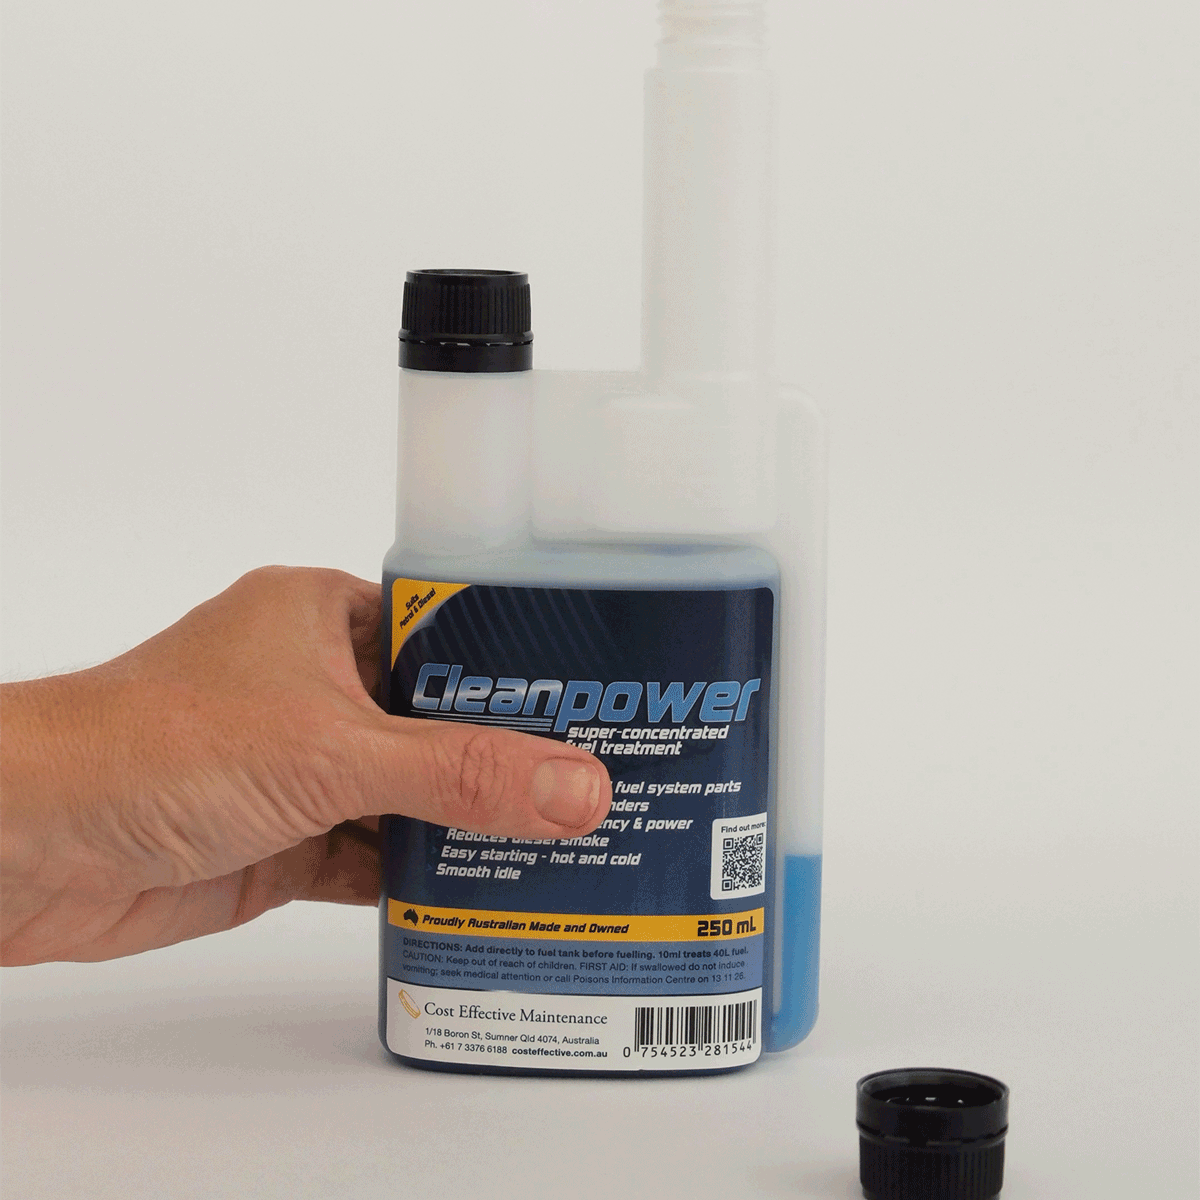 Cleanpower-250ml-3-squeeze